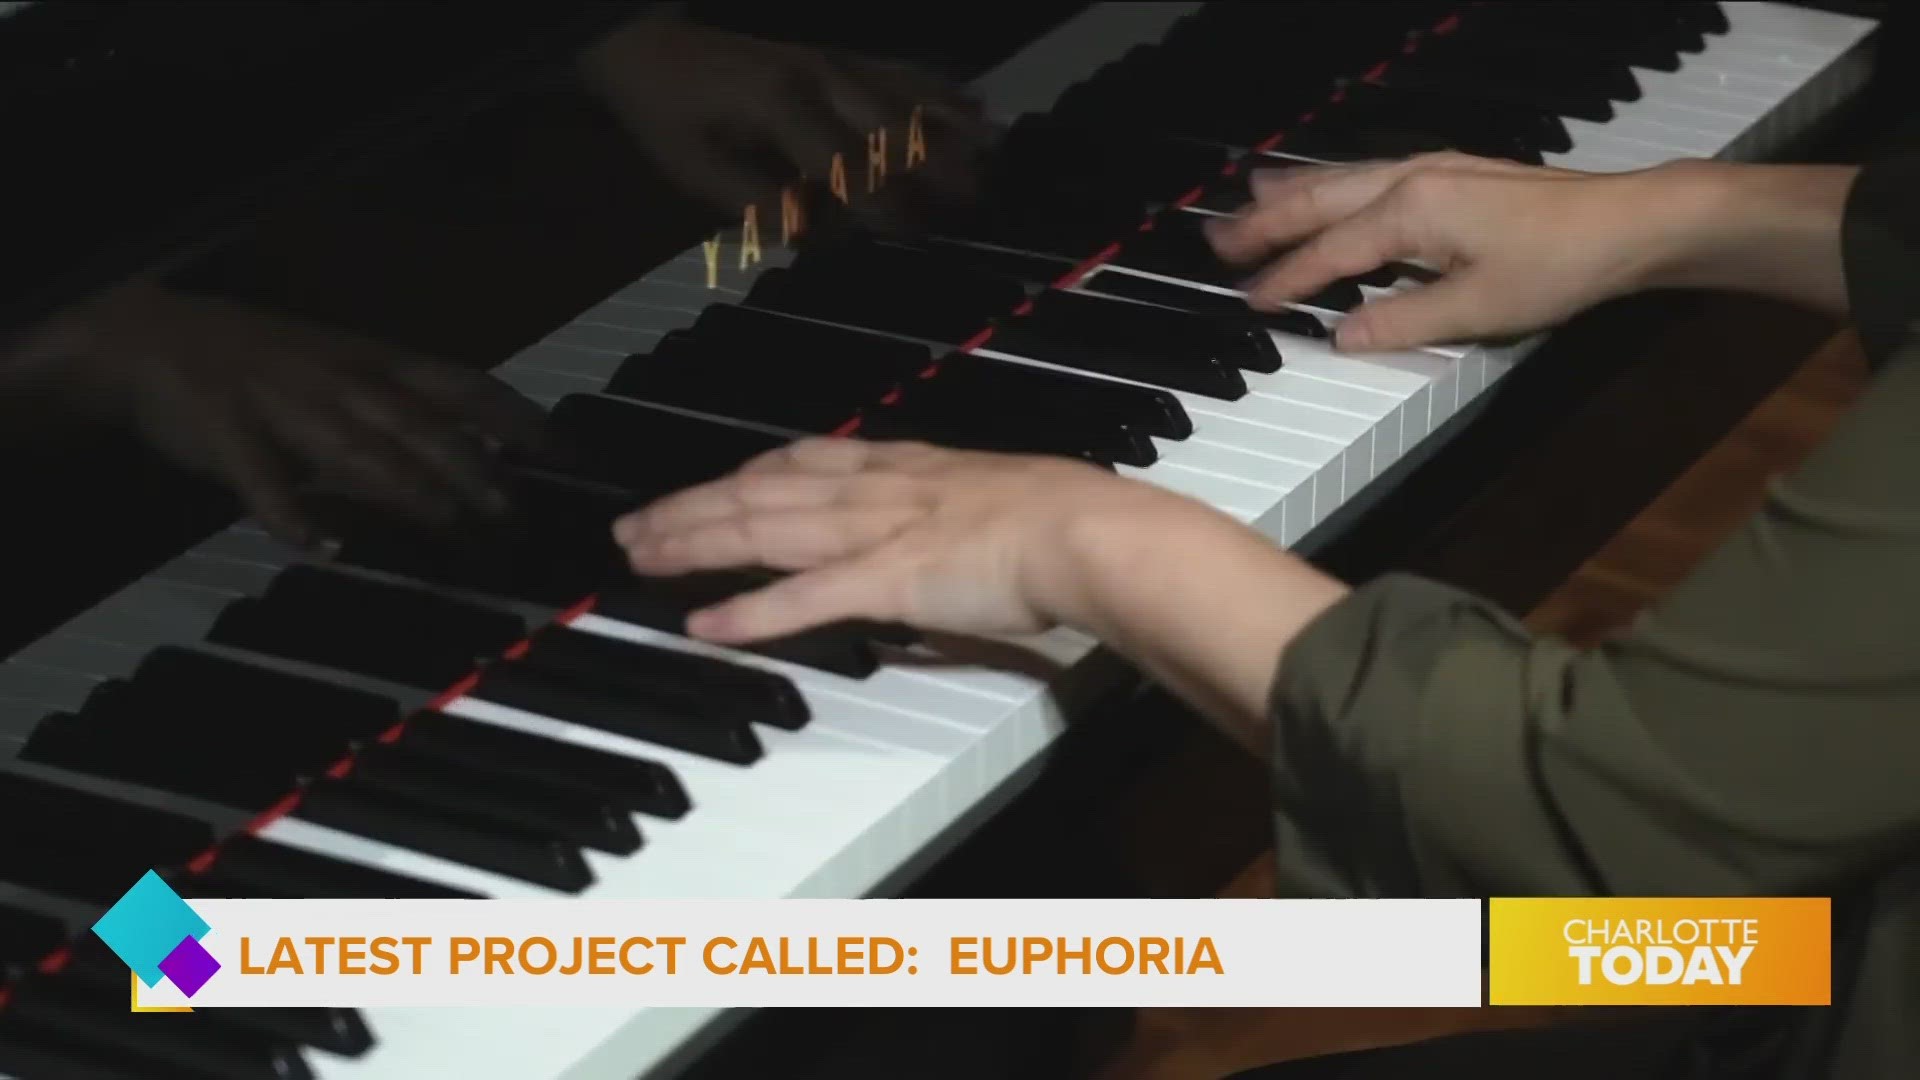 Acclaimed pianist unveils her latest project - Euphoria